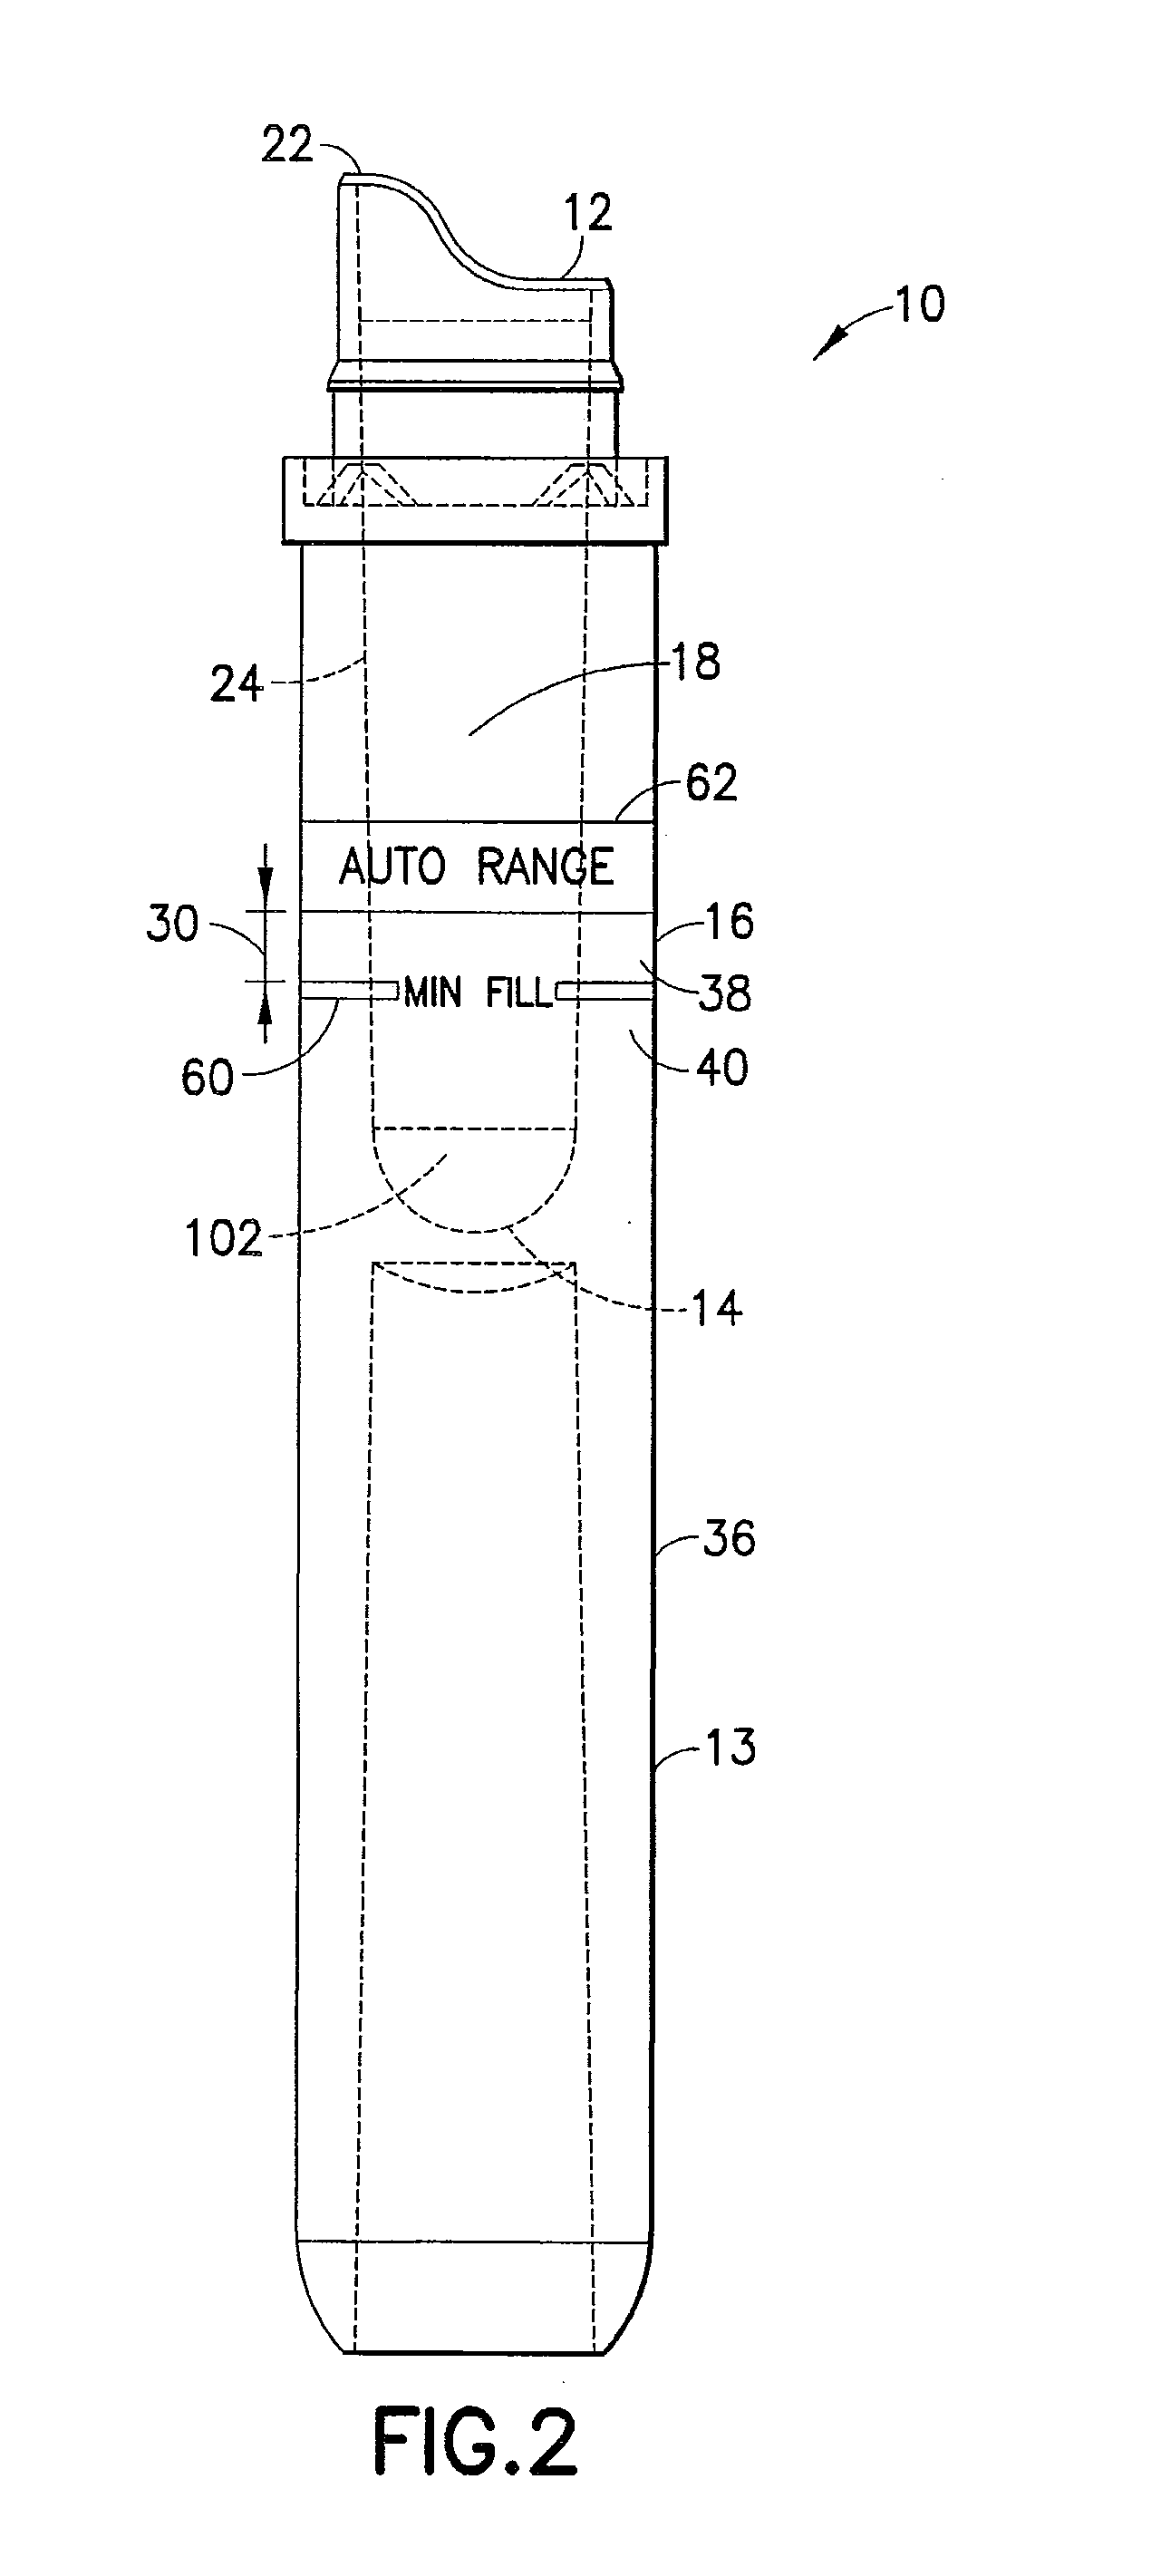 Specimen Collection Container Having a Transitional Fill-Volume Indicator Indicating Extraction Method